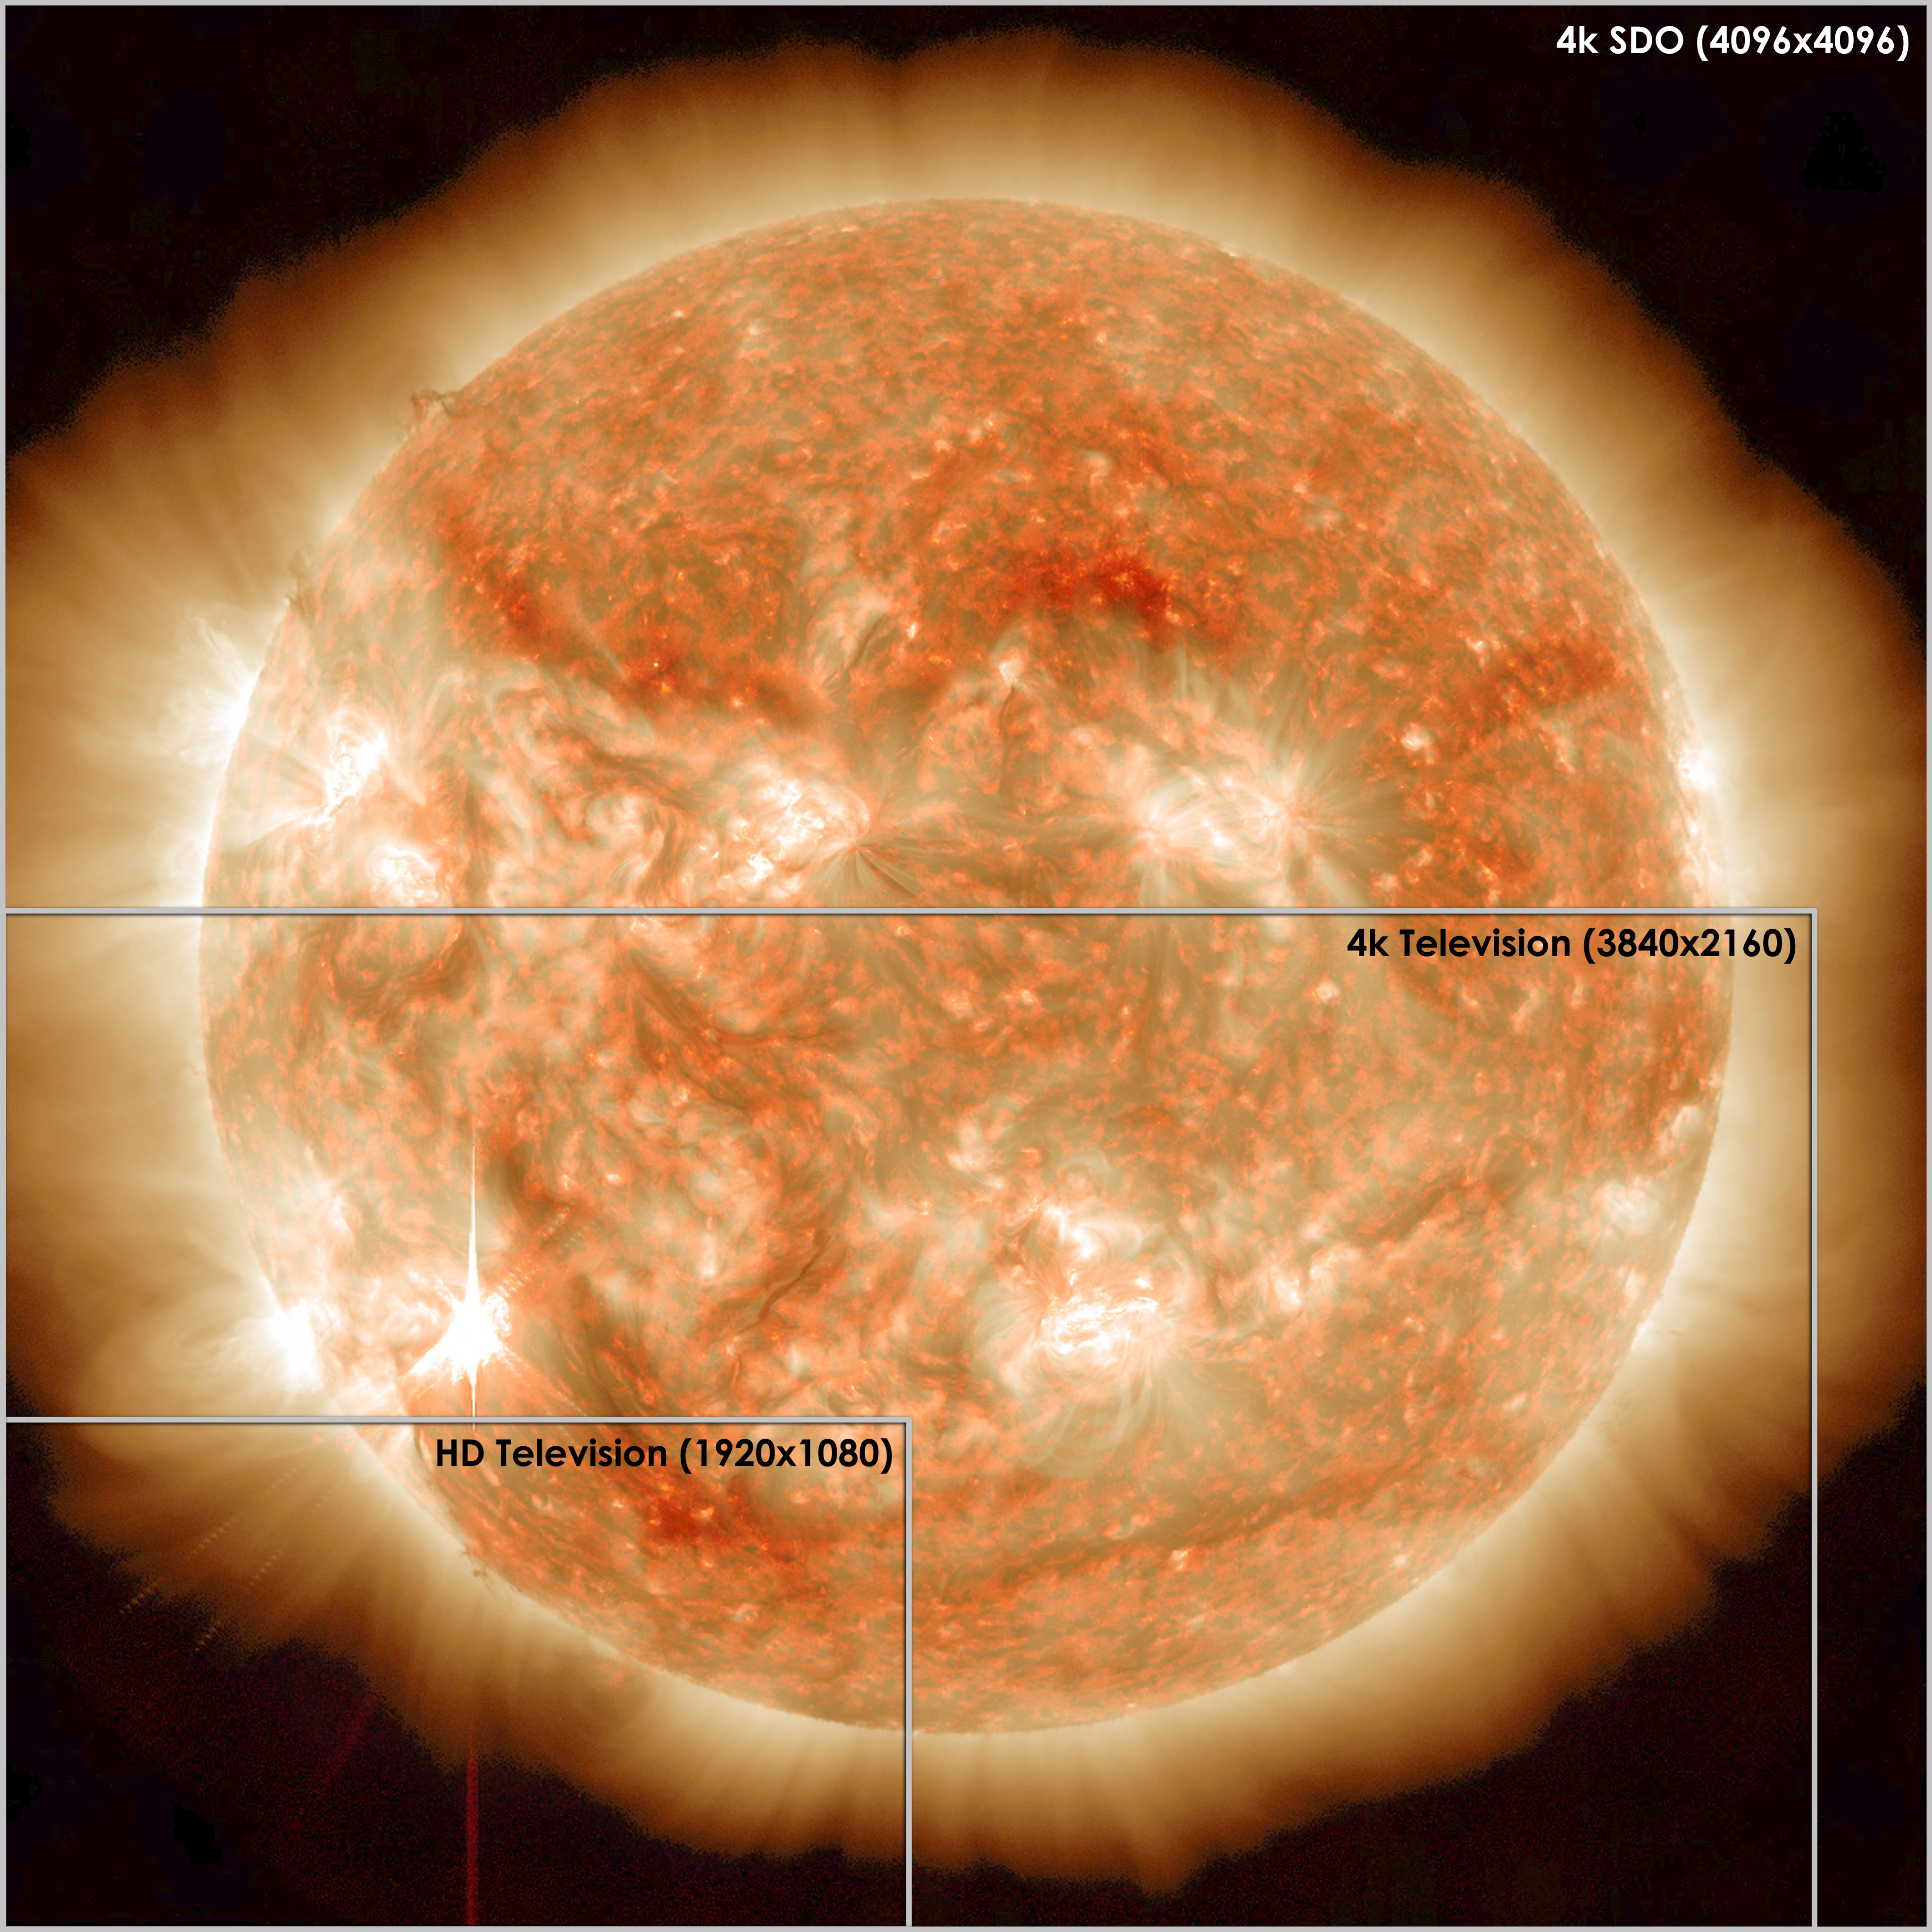 Ultra high-definition TVs &mdash; sold for the first time in late 2012 and early 2013 &mdash;have four times the pixels of a current high-definition TV, but still have fewer pixels than the images from NASA's Solar Dynamics Observatory (SDO). This image from SDO was captured on Nov.13, 2012, and shows star-shaped solar flare in the lower left-hand corner. Credit: NASA/GSFC/SDO